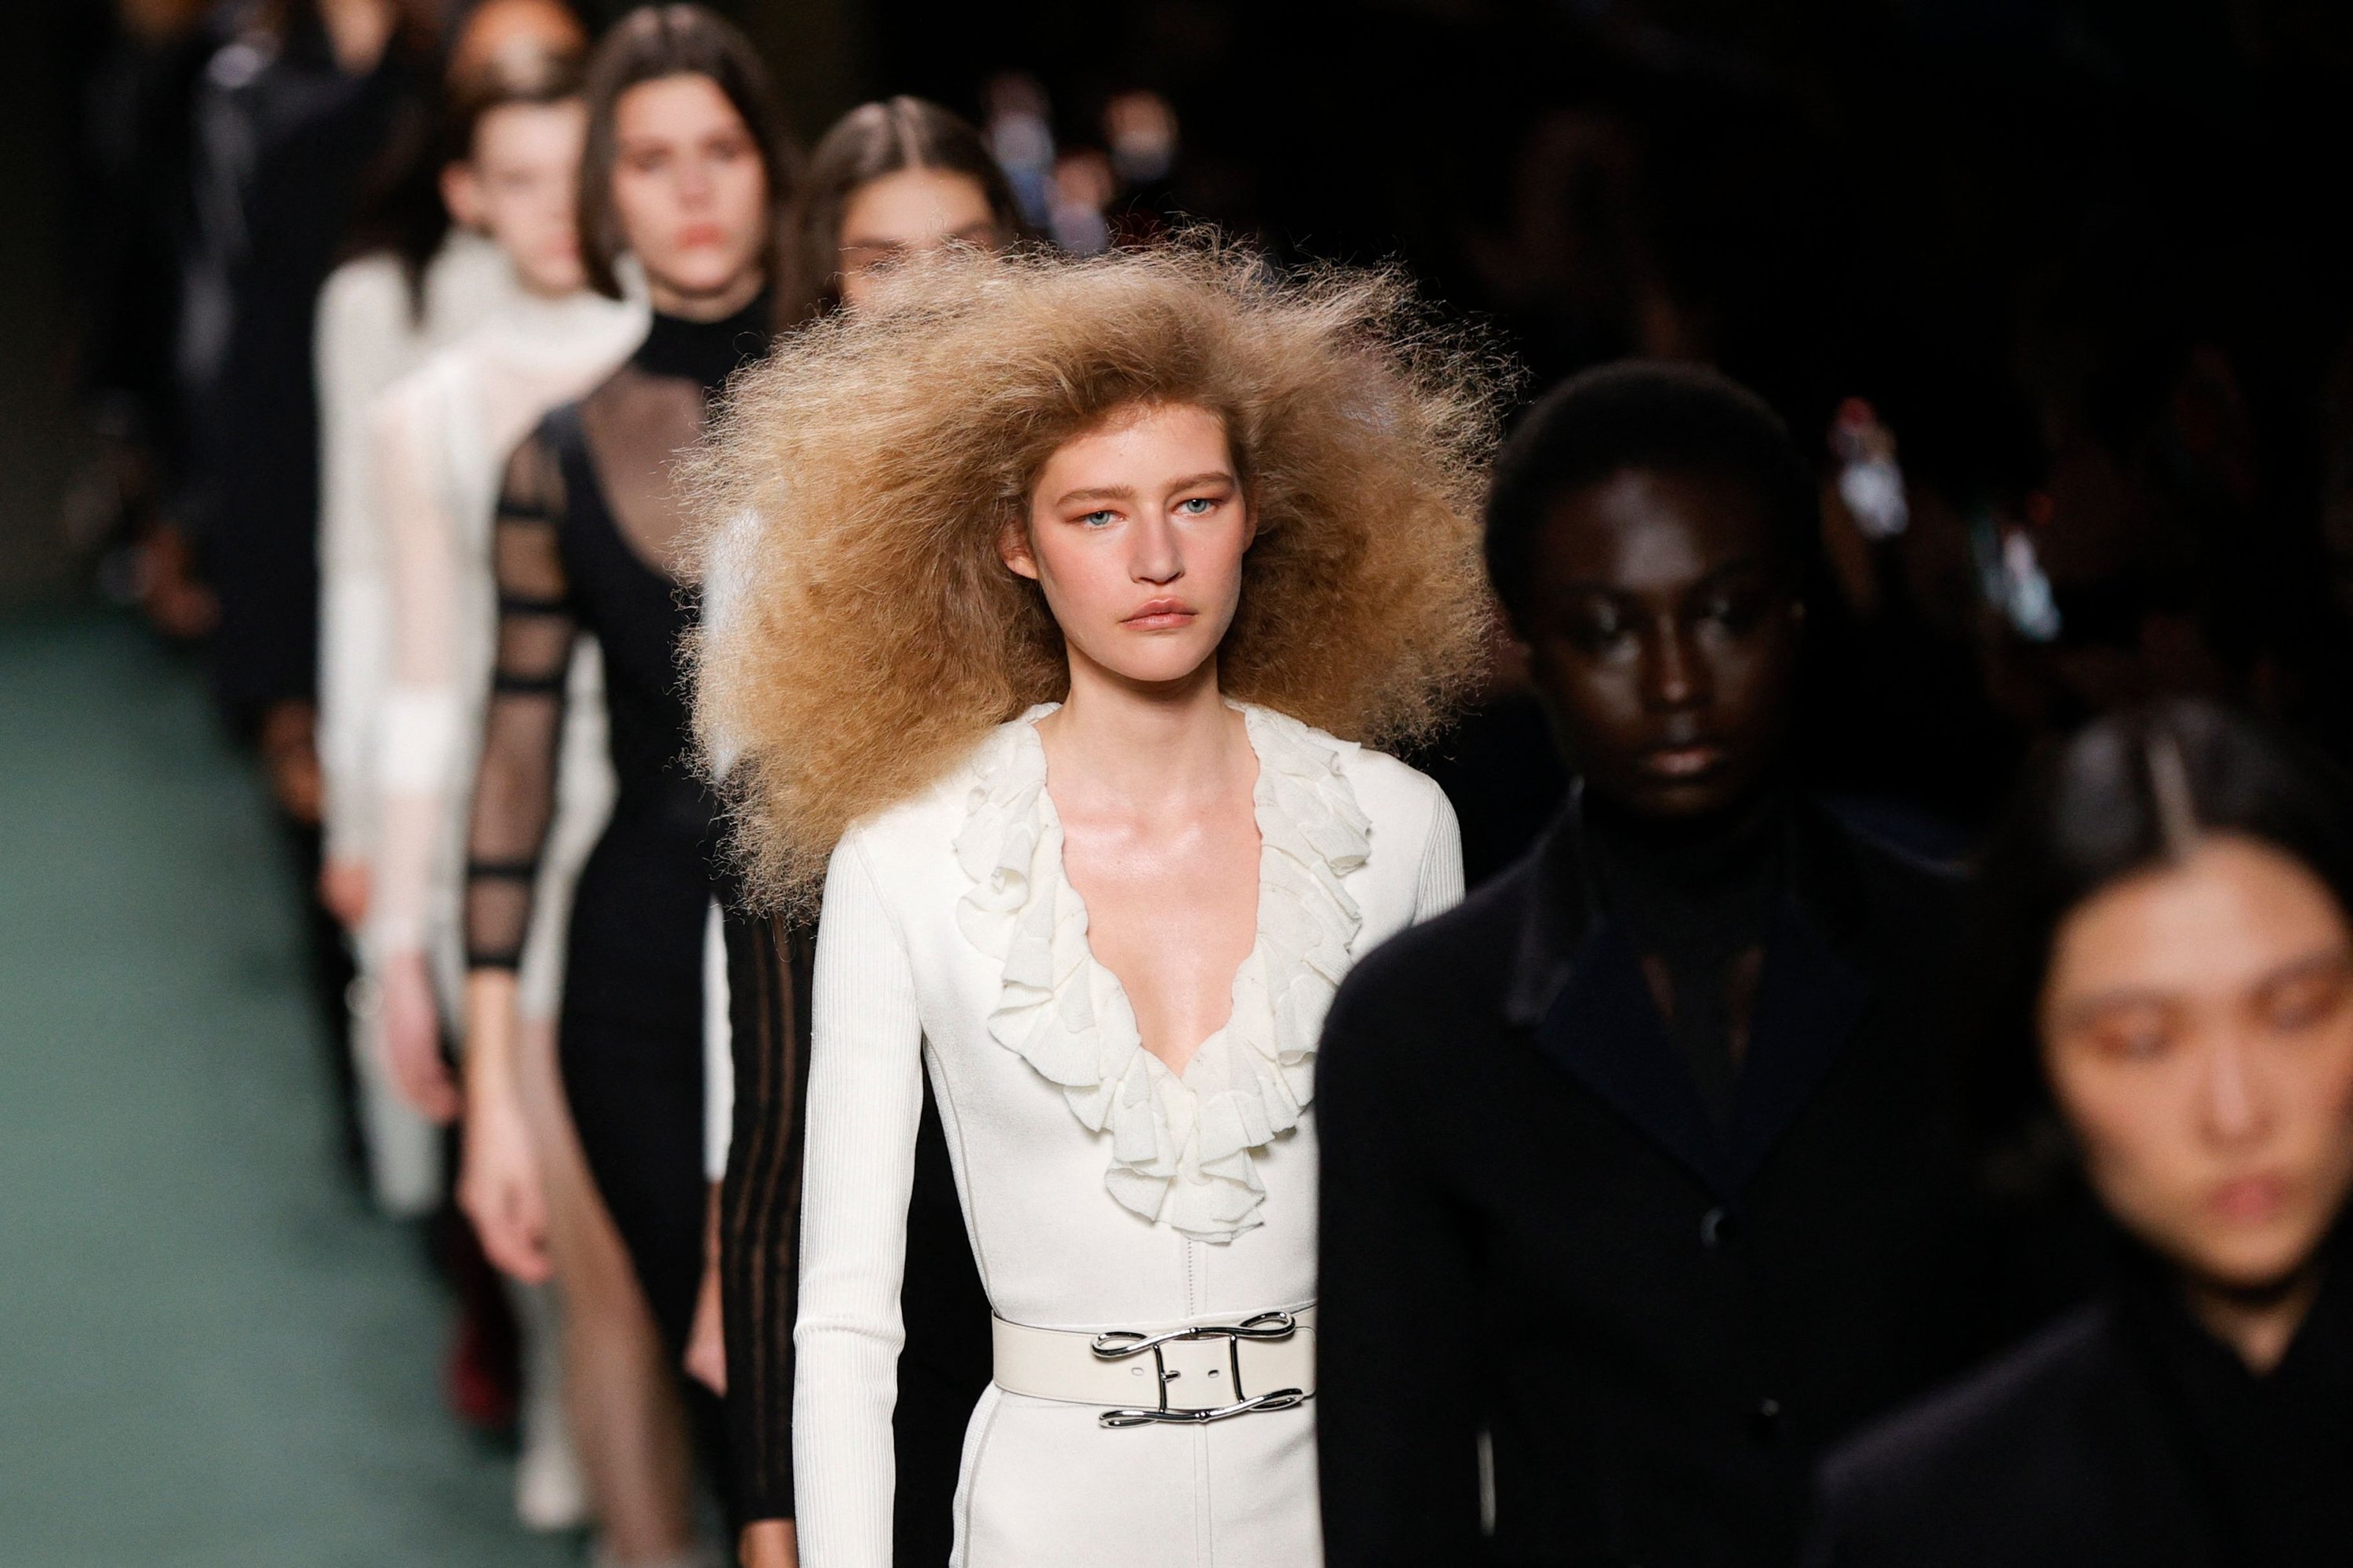 Paris Fashion Week 2022: A glance at fall/winter trends | Daily Sabah